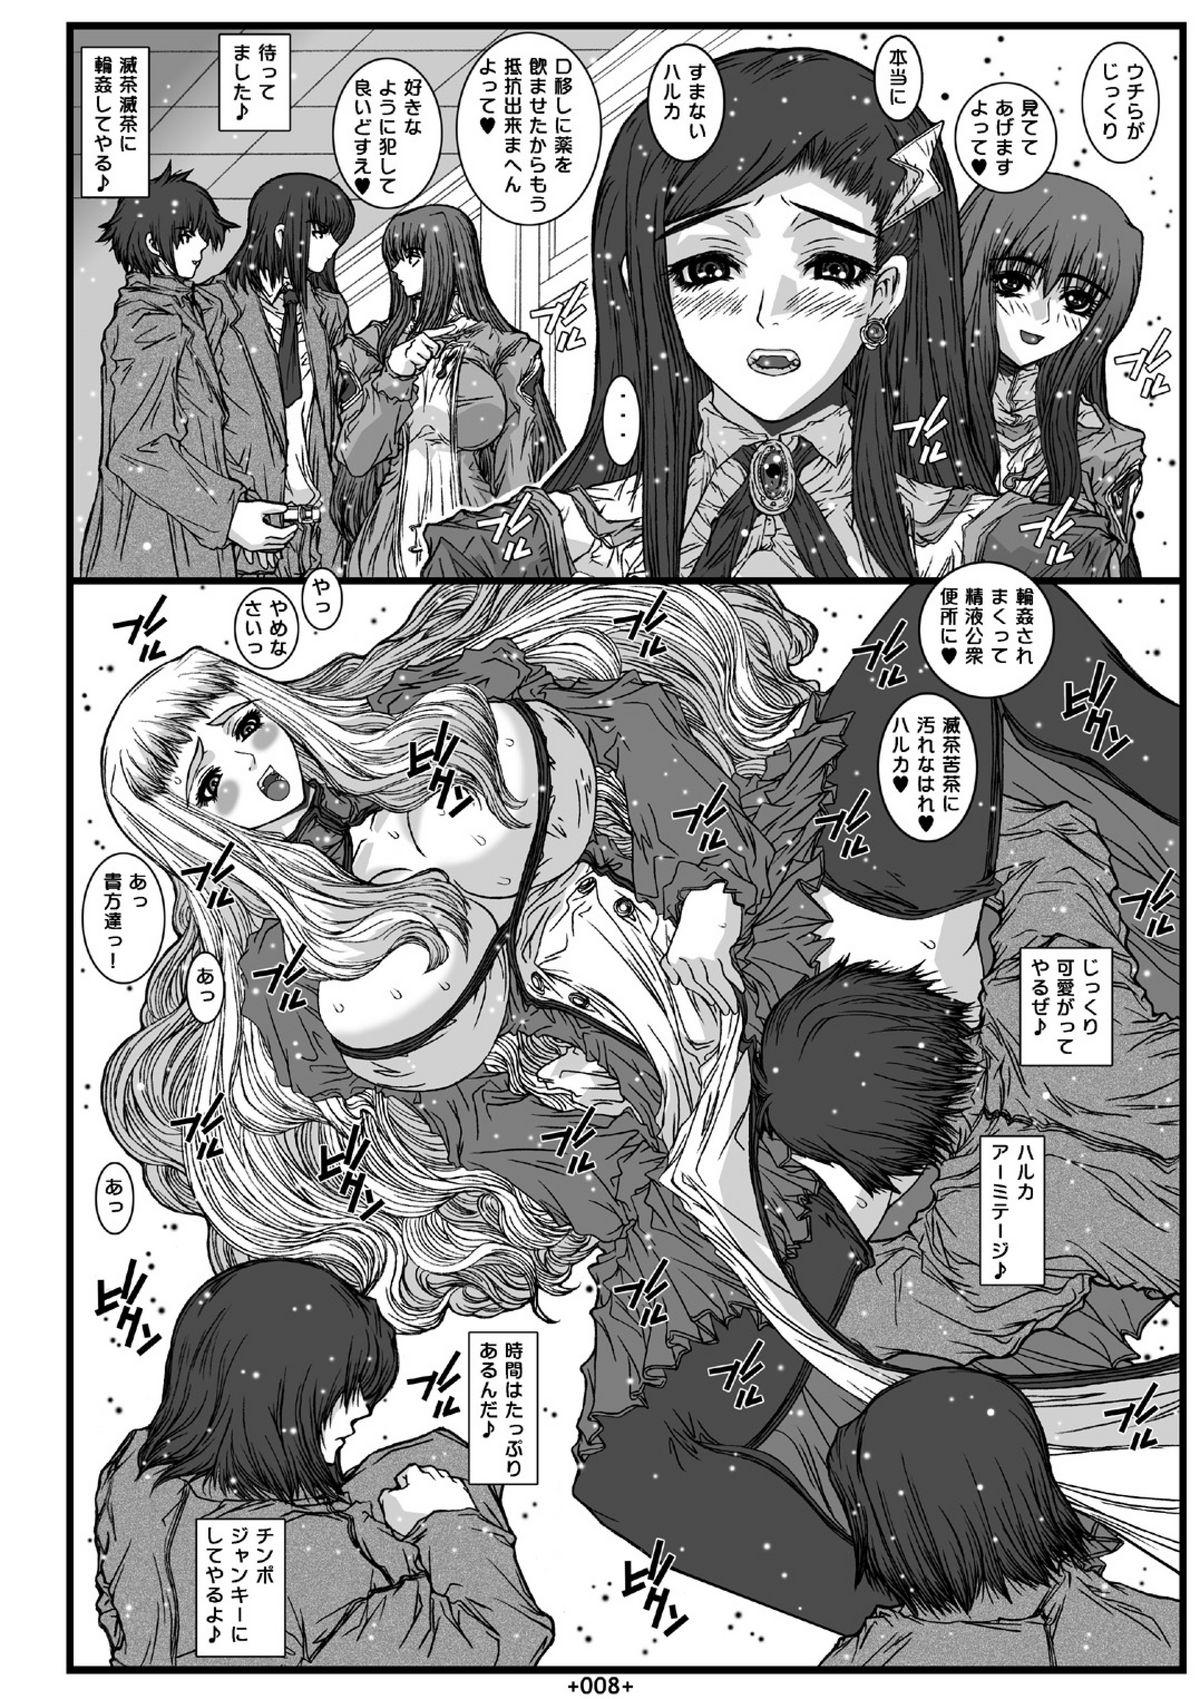 Exgirlfriend Mai-In 2 - Mai-otome Spooning - Page 10